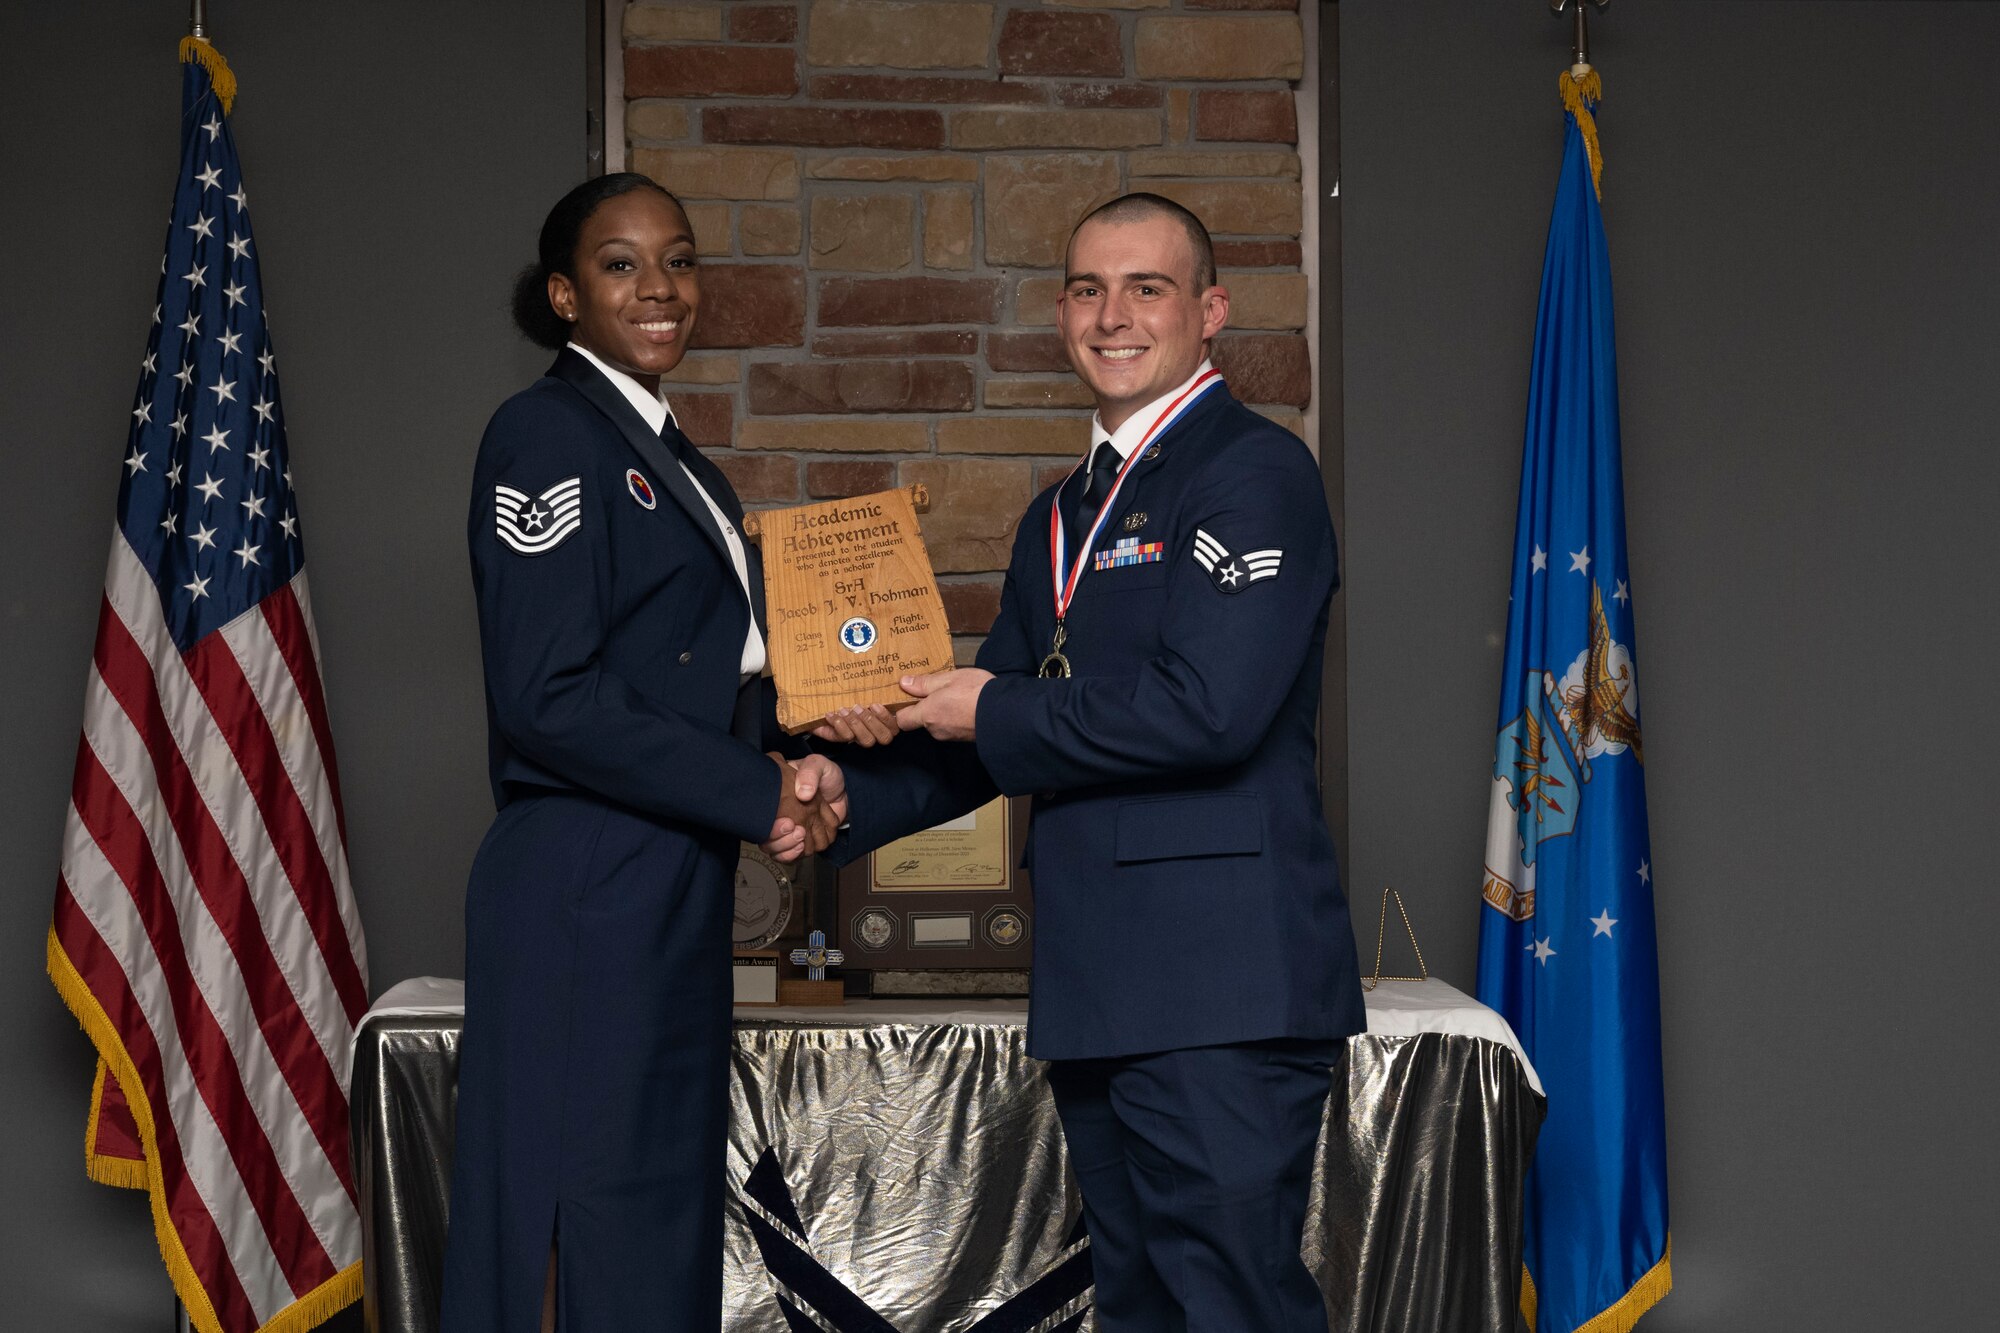 Senior Airman Jacob J. V. Hohman, Airman Leadership School graduate, accepts the academic achievement award during the graduation of ALS class 22-2, Dec. 9, 2021, on Holloman Air Force Base, New Mexico. The academic award is presented to the student with the highest overall average on all academic evaluations. (U.S. Air Force photo by Senior Airman Kristin Weathersby)